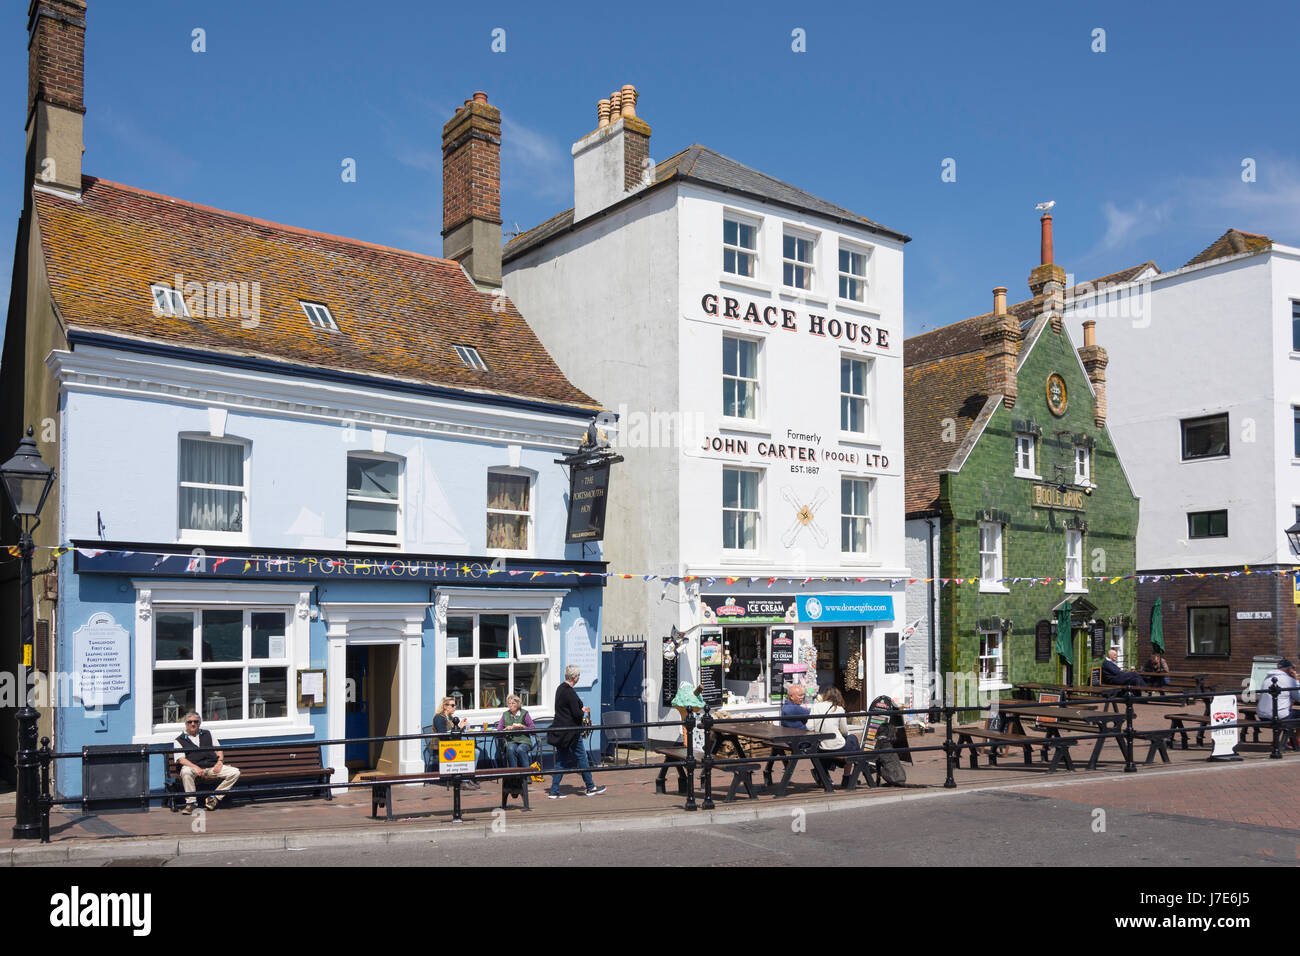 The Portsmouth Hoy and Poole Arms Pubs on seafront, Town Quay, Poole, Dorset, England, United Kingdom Stock Photo